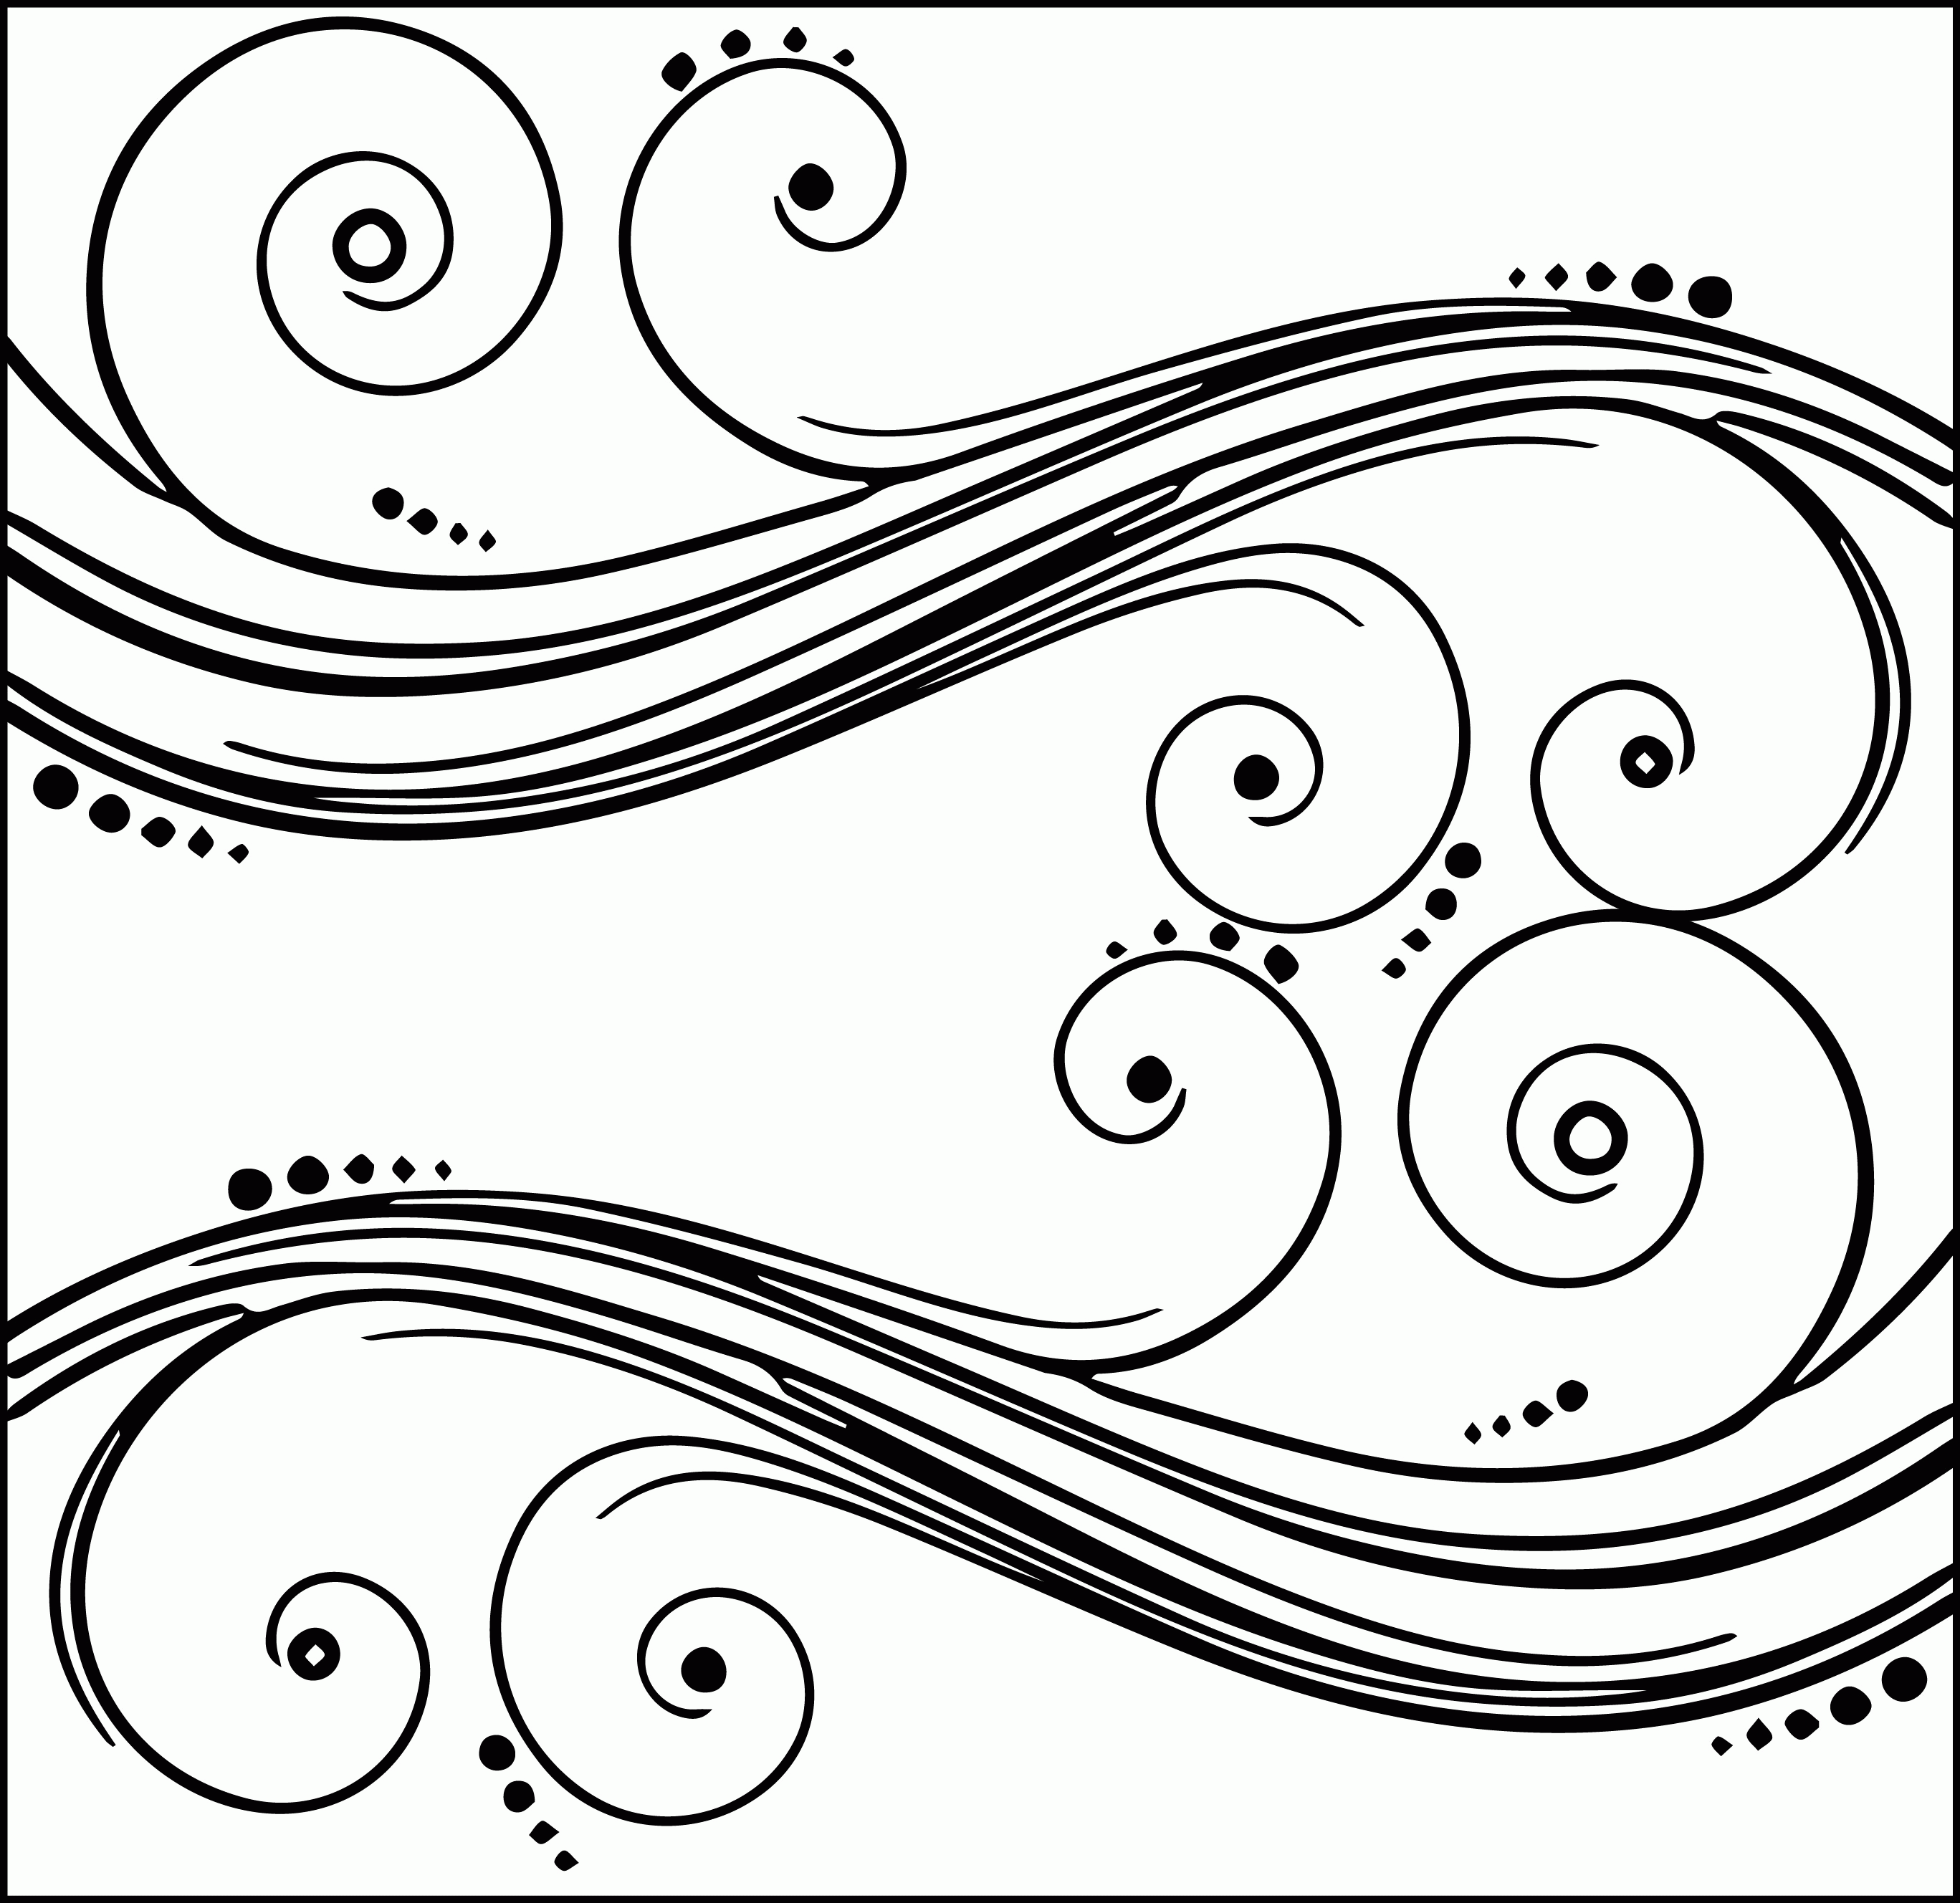 Abstract Swirls Coloring Page | Wecoloringpage